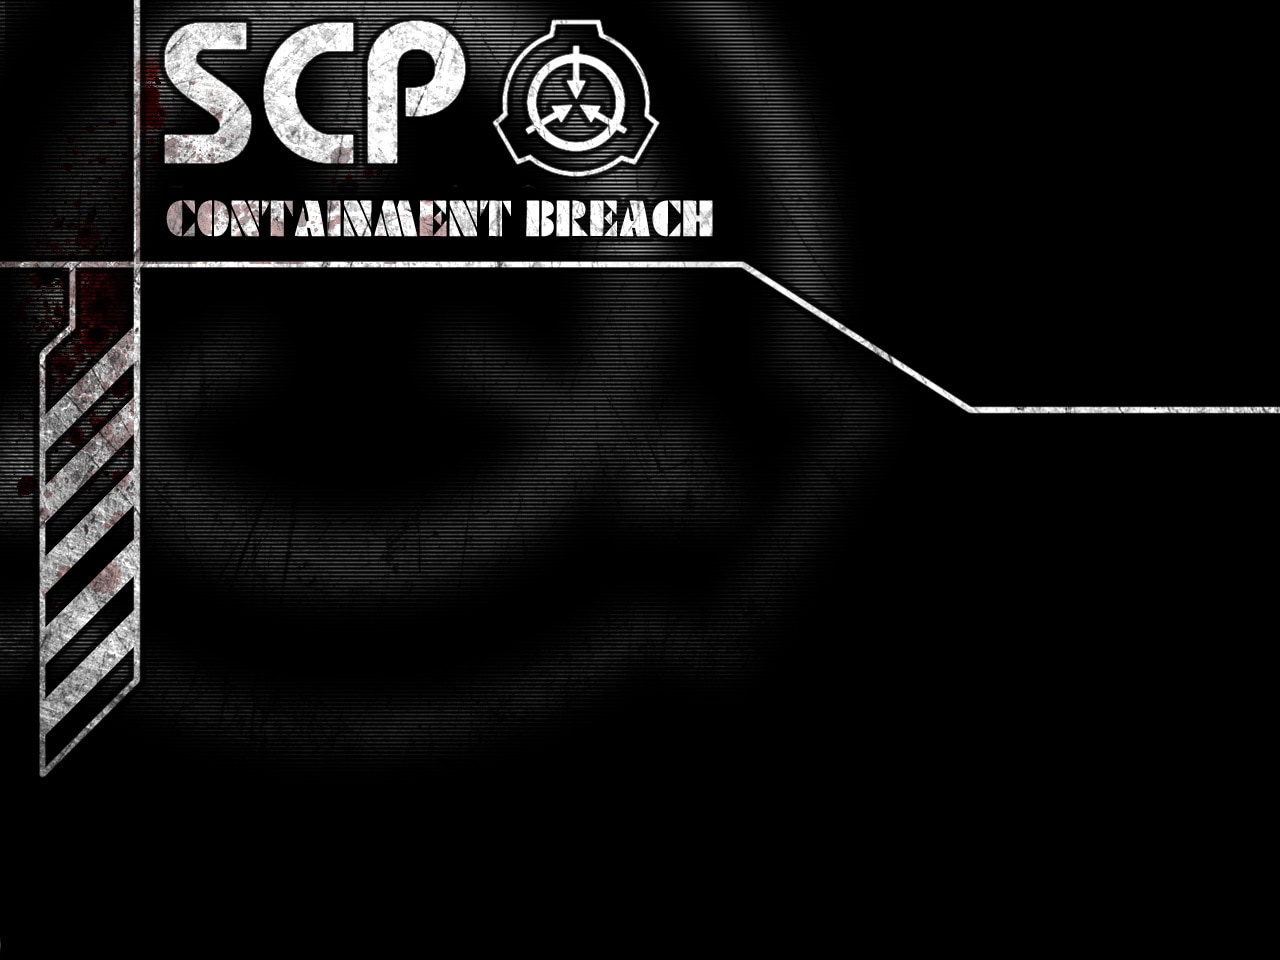 Free indie horror SCP: Containment Breach gets a new update full of low-fi  scares